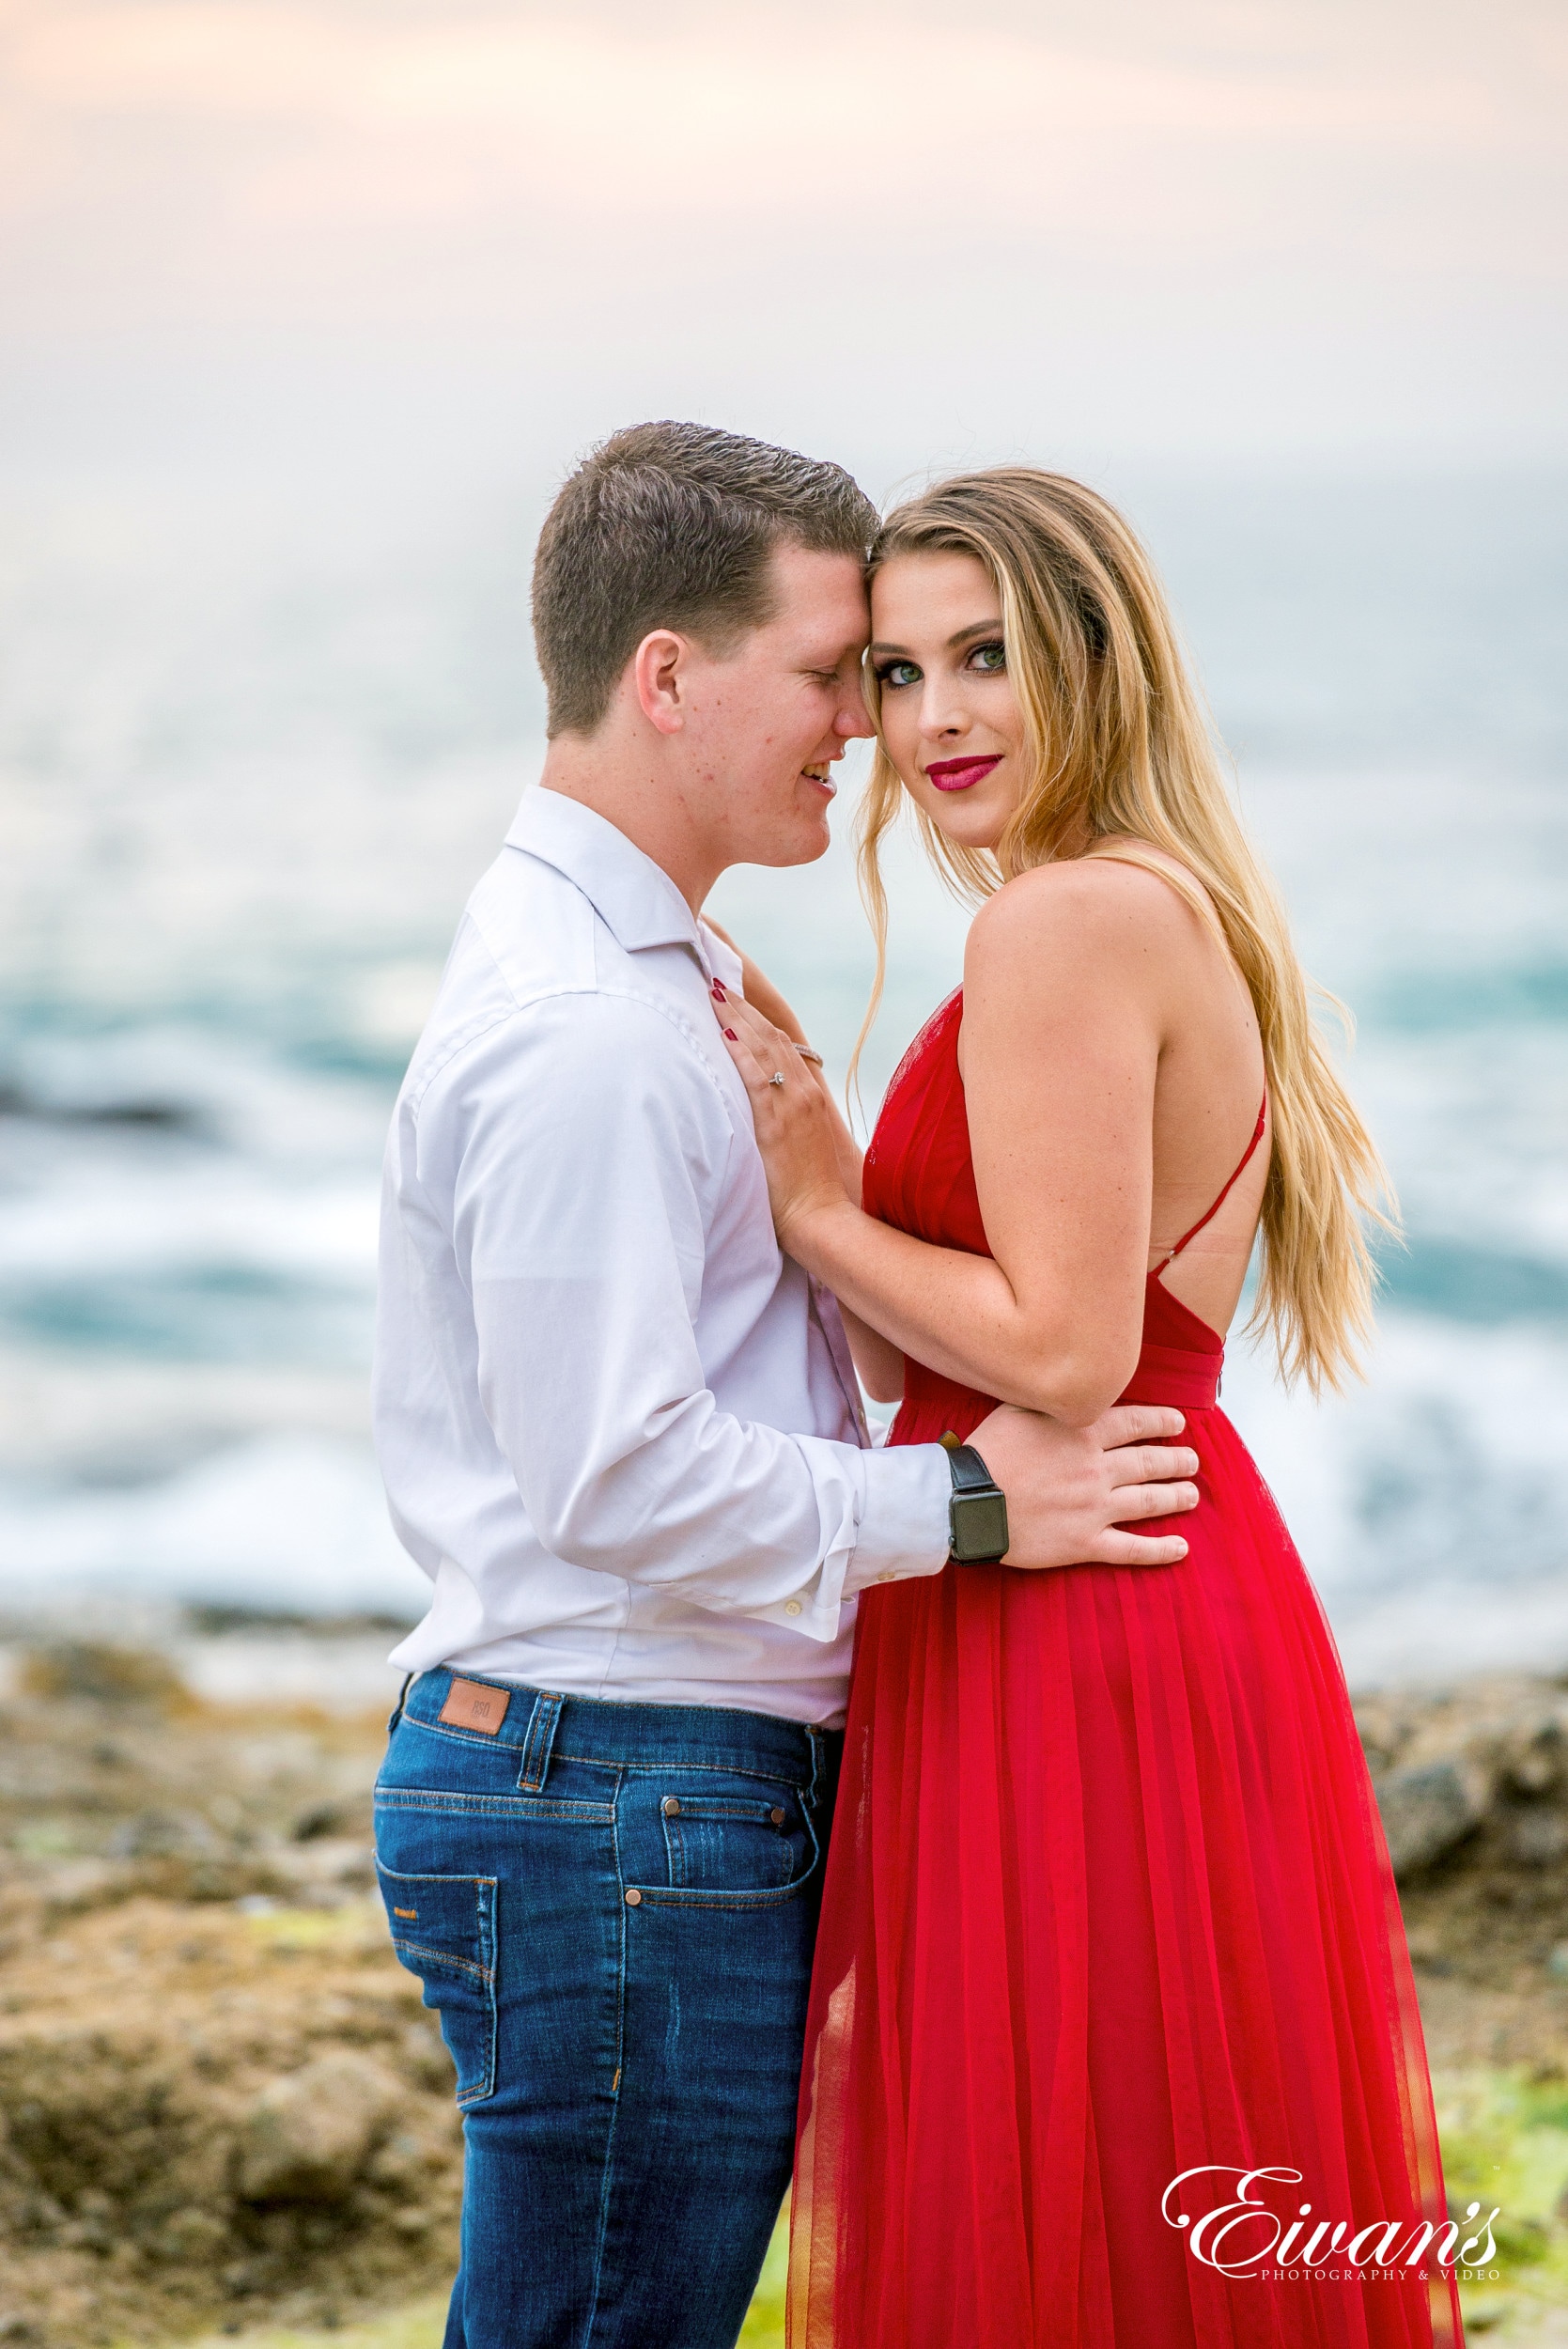 man in white dress shirt kissing woman in red dress on seashore during daytime